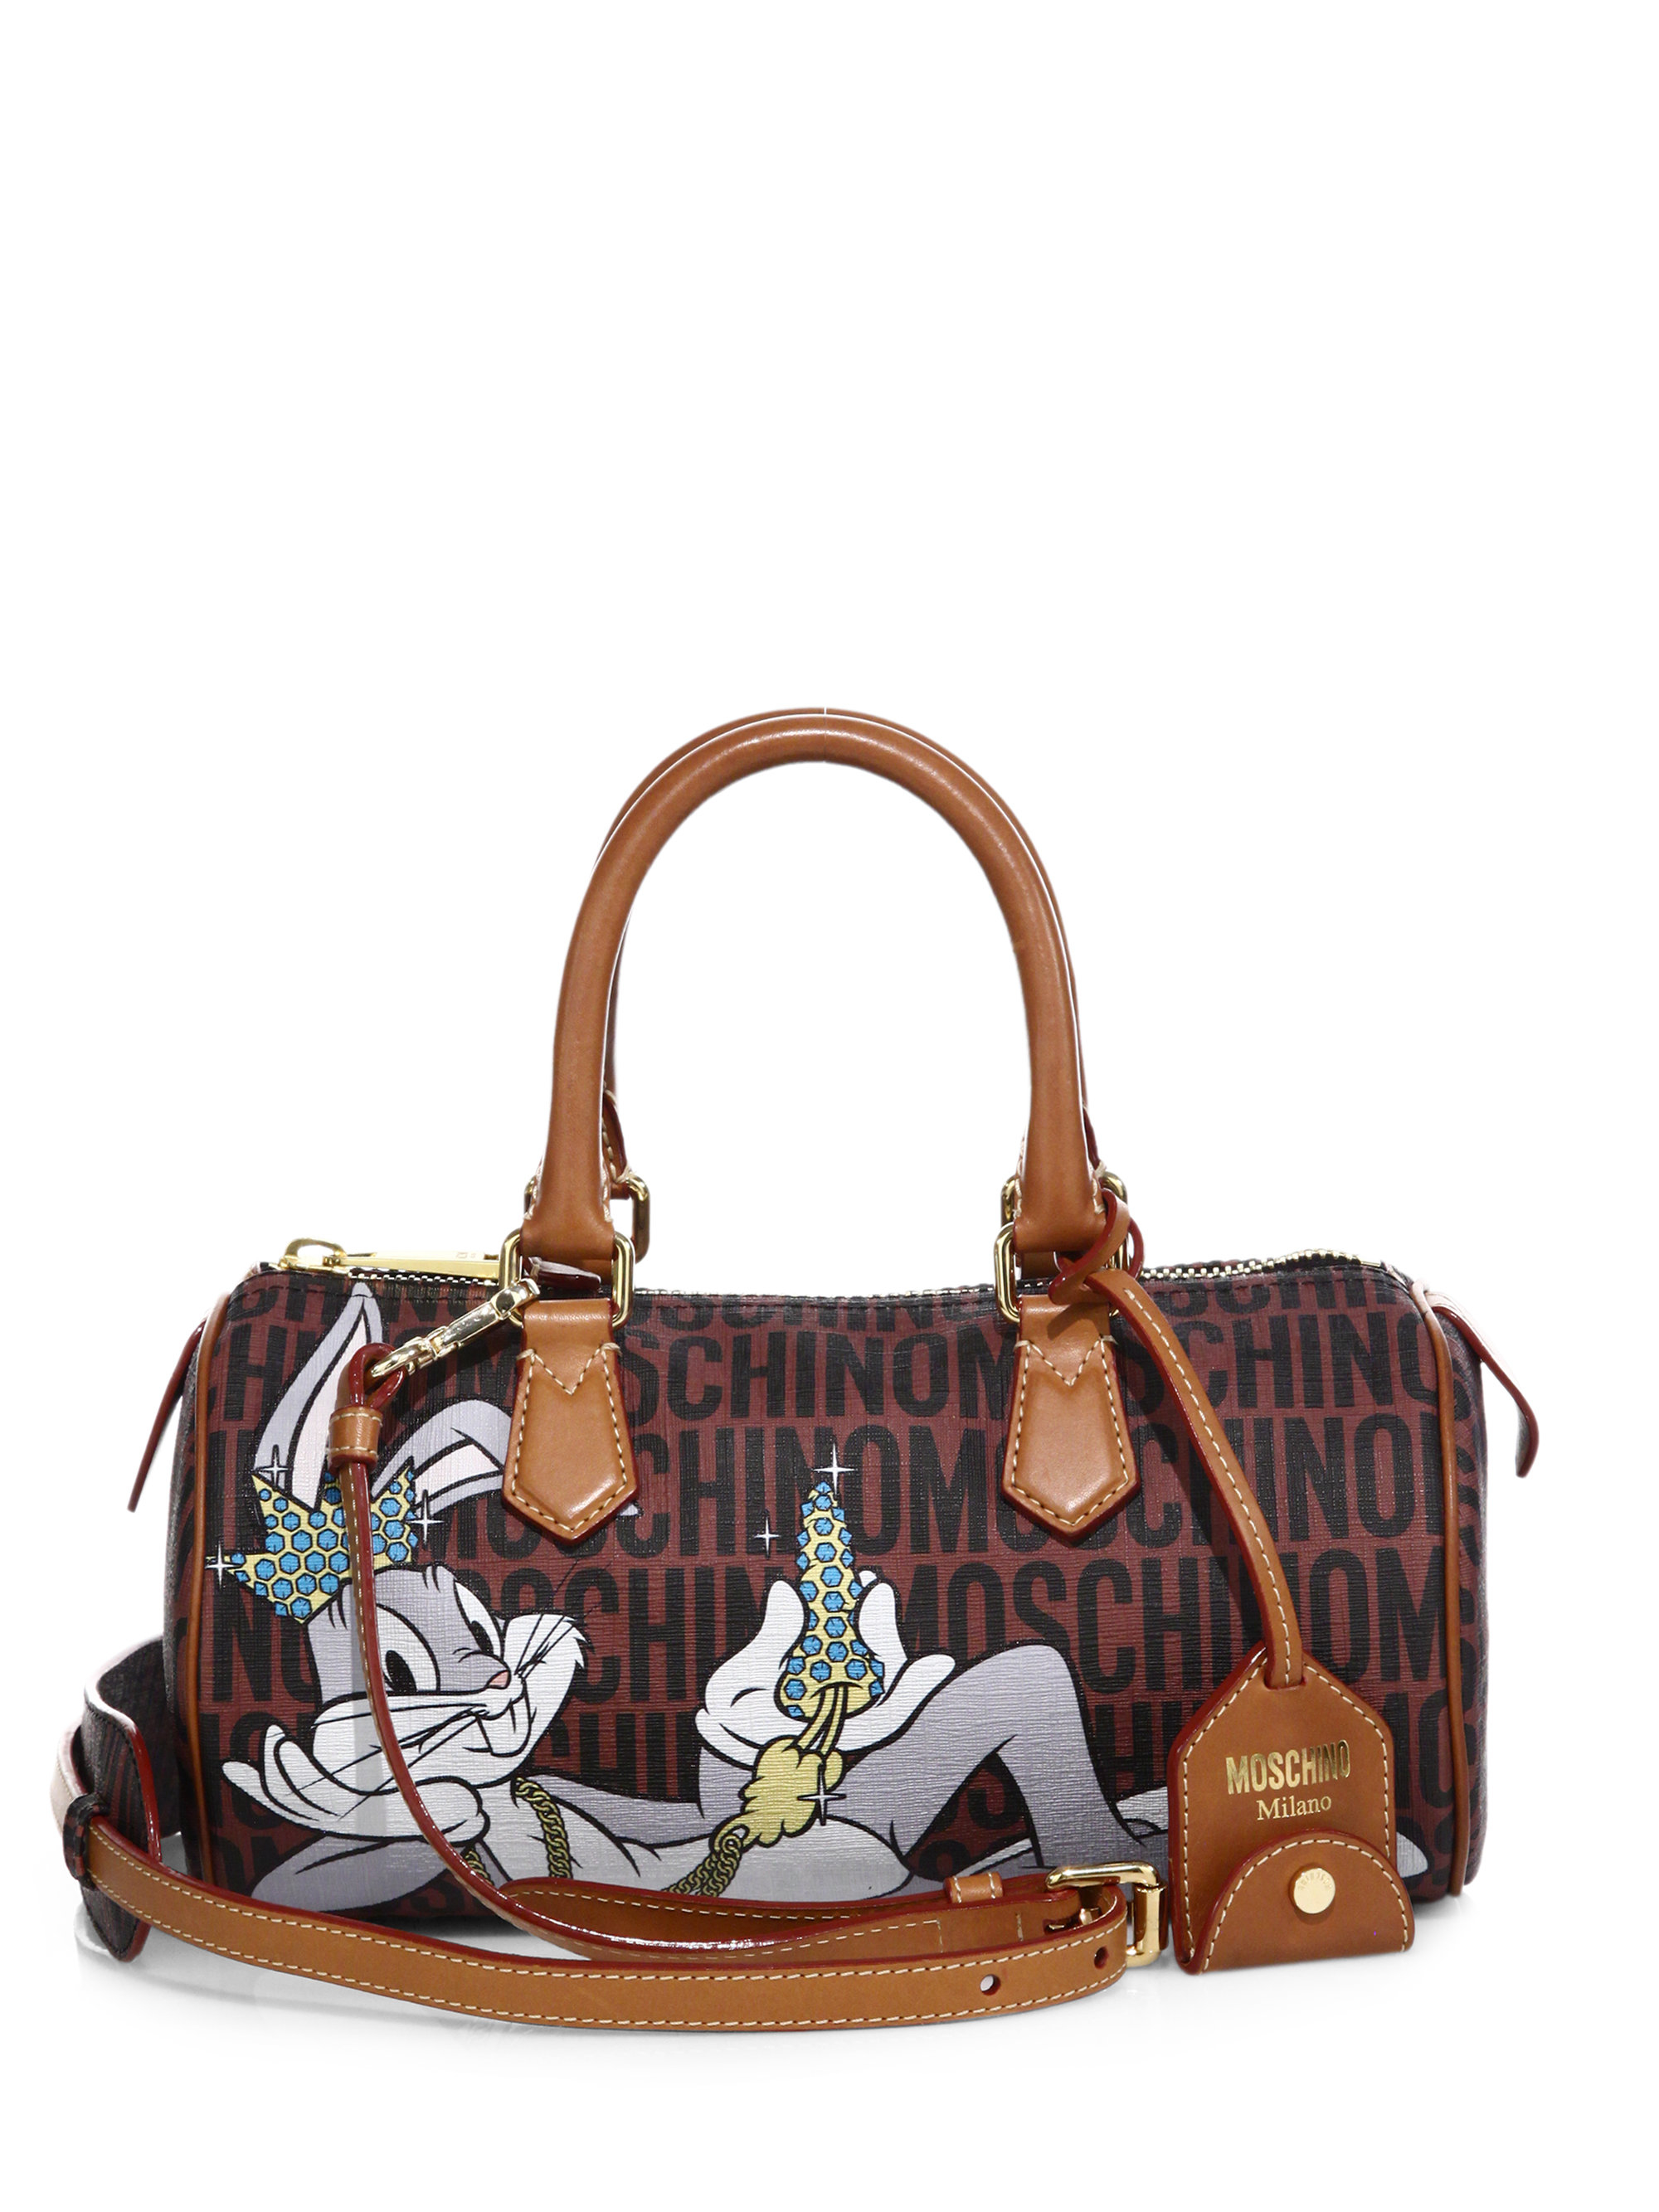 Moschino Looney Tunes Textured Faux Leather Duffel Bag in Brown | Lyst